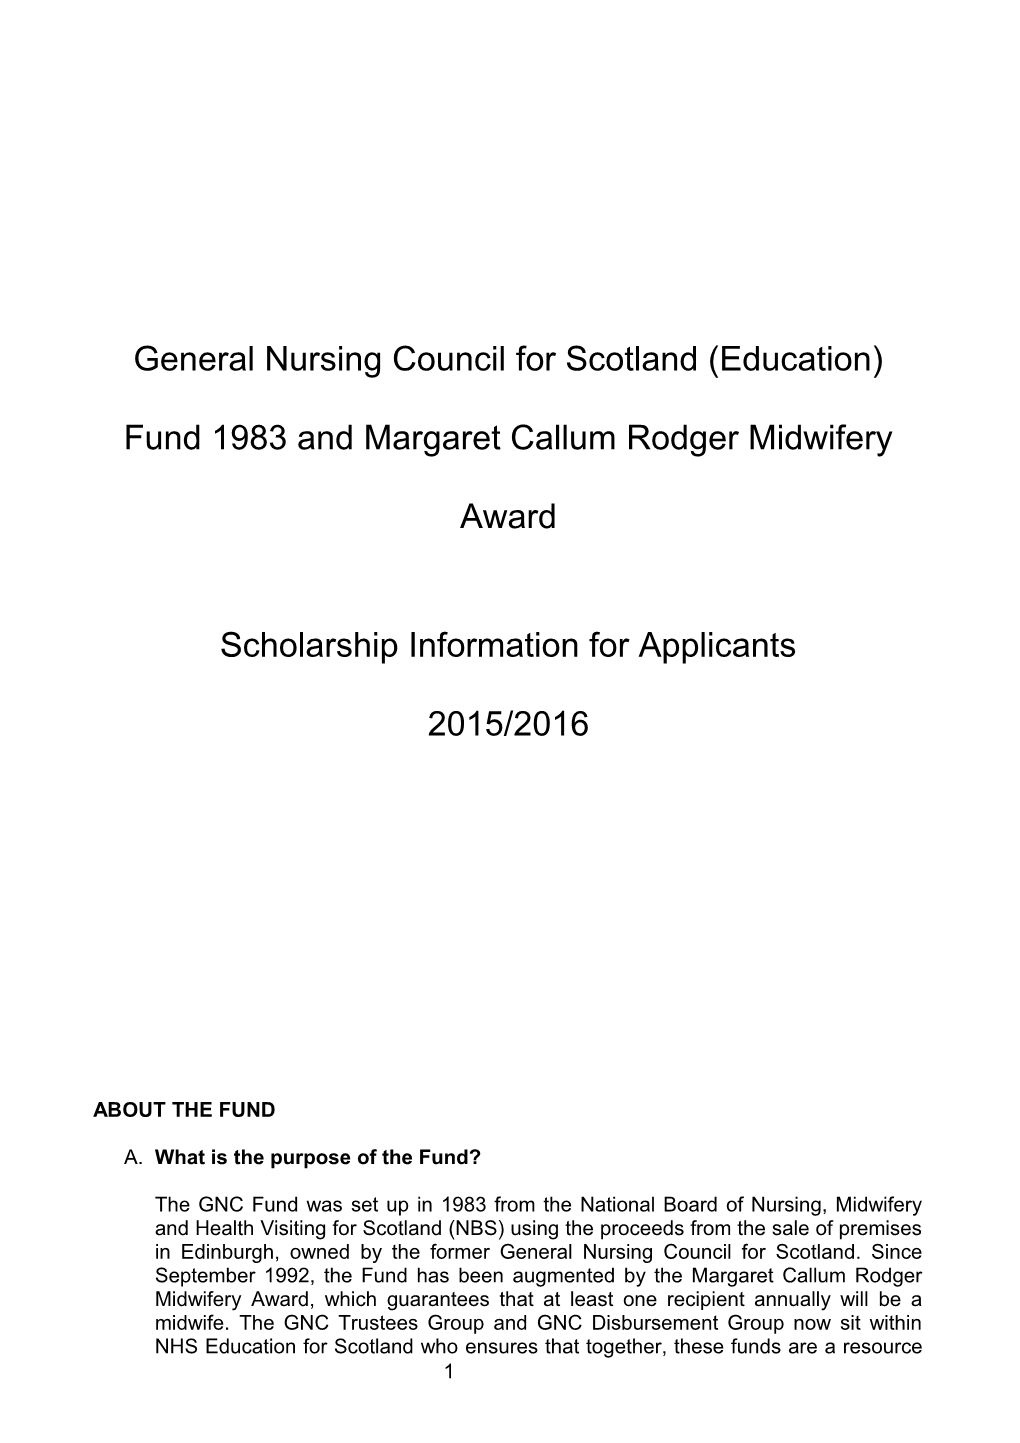 Scholarship Information for Applicants